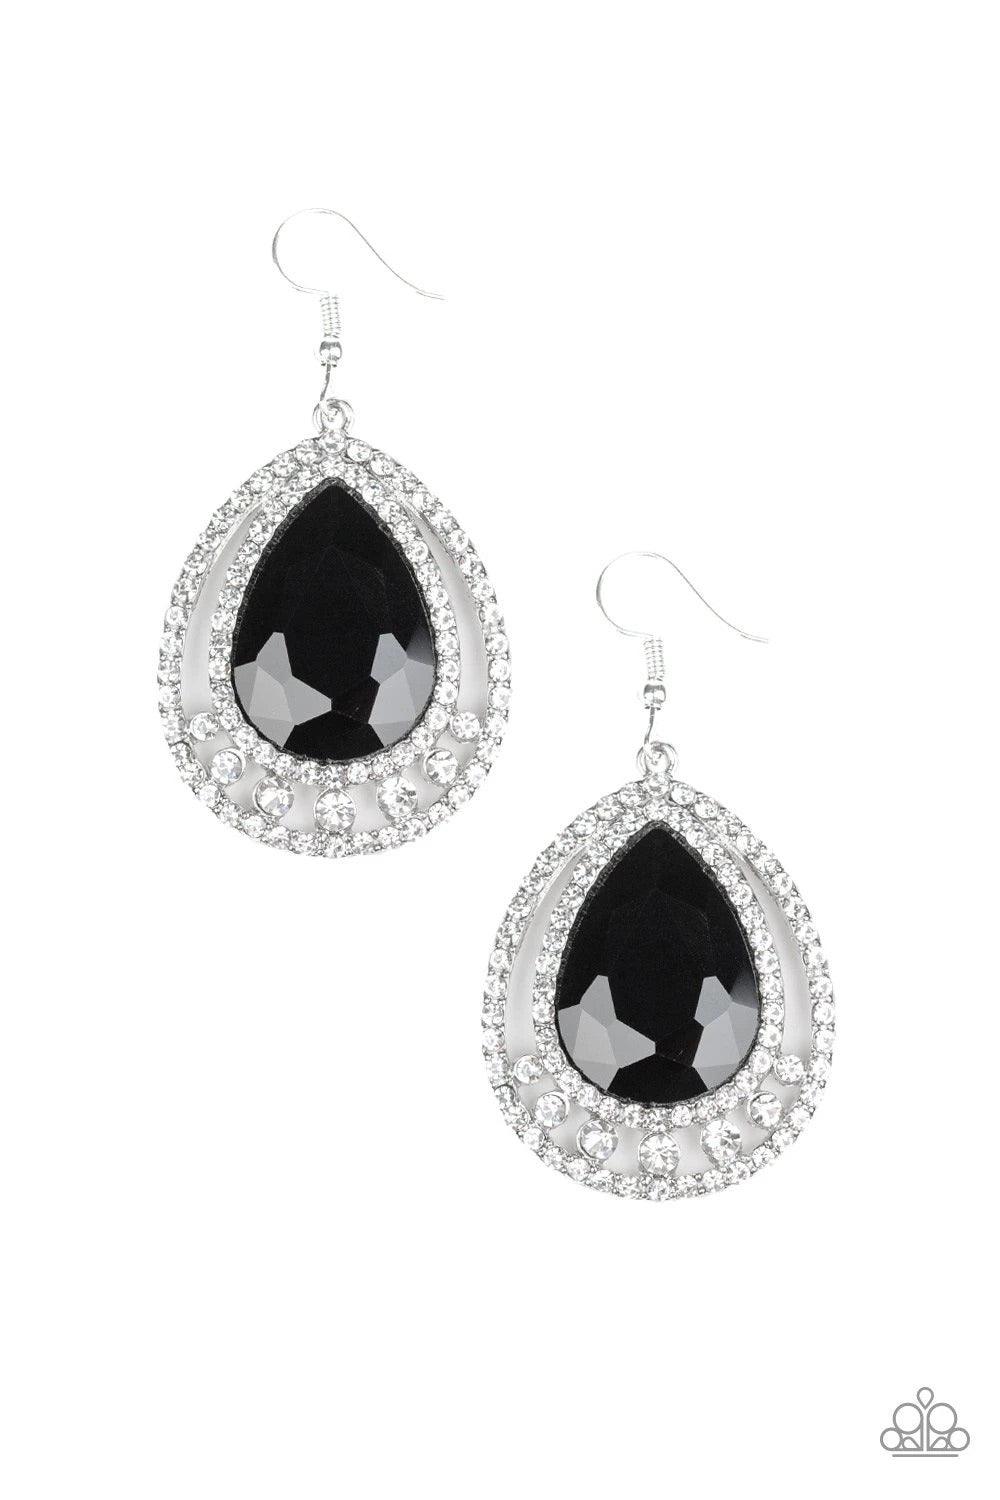 Paparazzi Accessories Millionaire Debonair - Black A dazzling black teardrop rhinestone is pressed into the center of a stack of teardrop frames radiating with glassy white rhinestones, creating a glamorous lure. Earring attaches to a standard fishhook fi